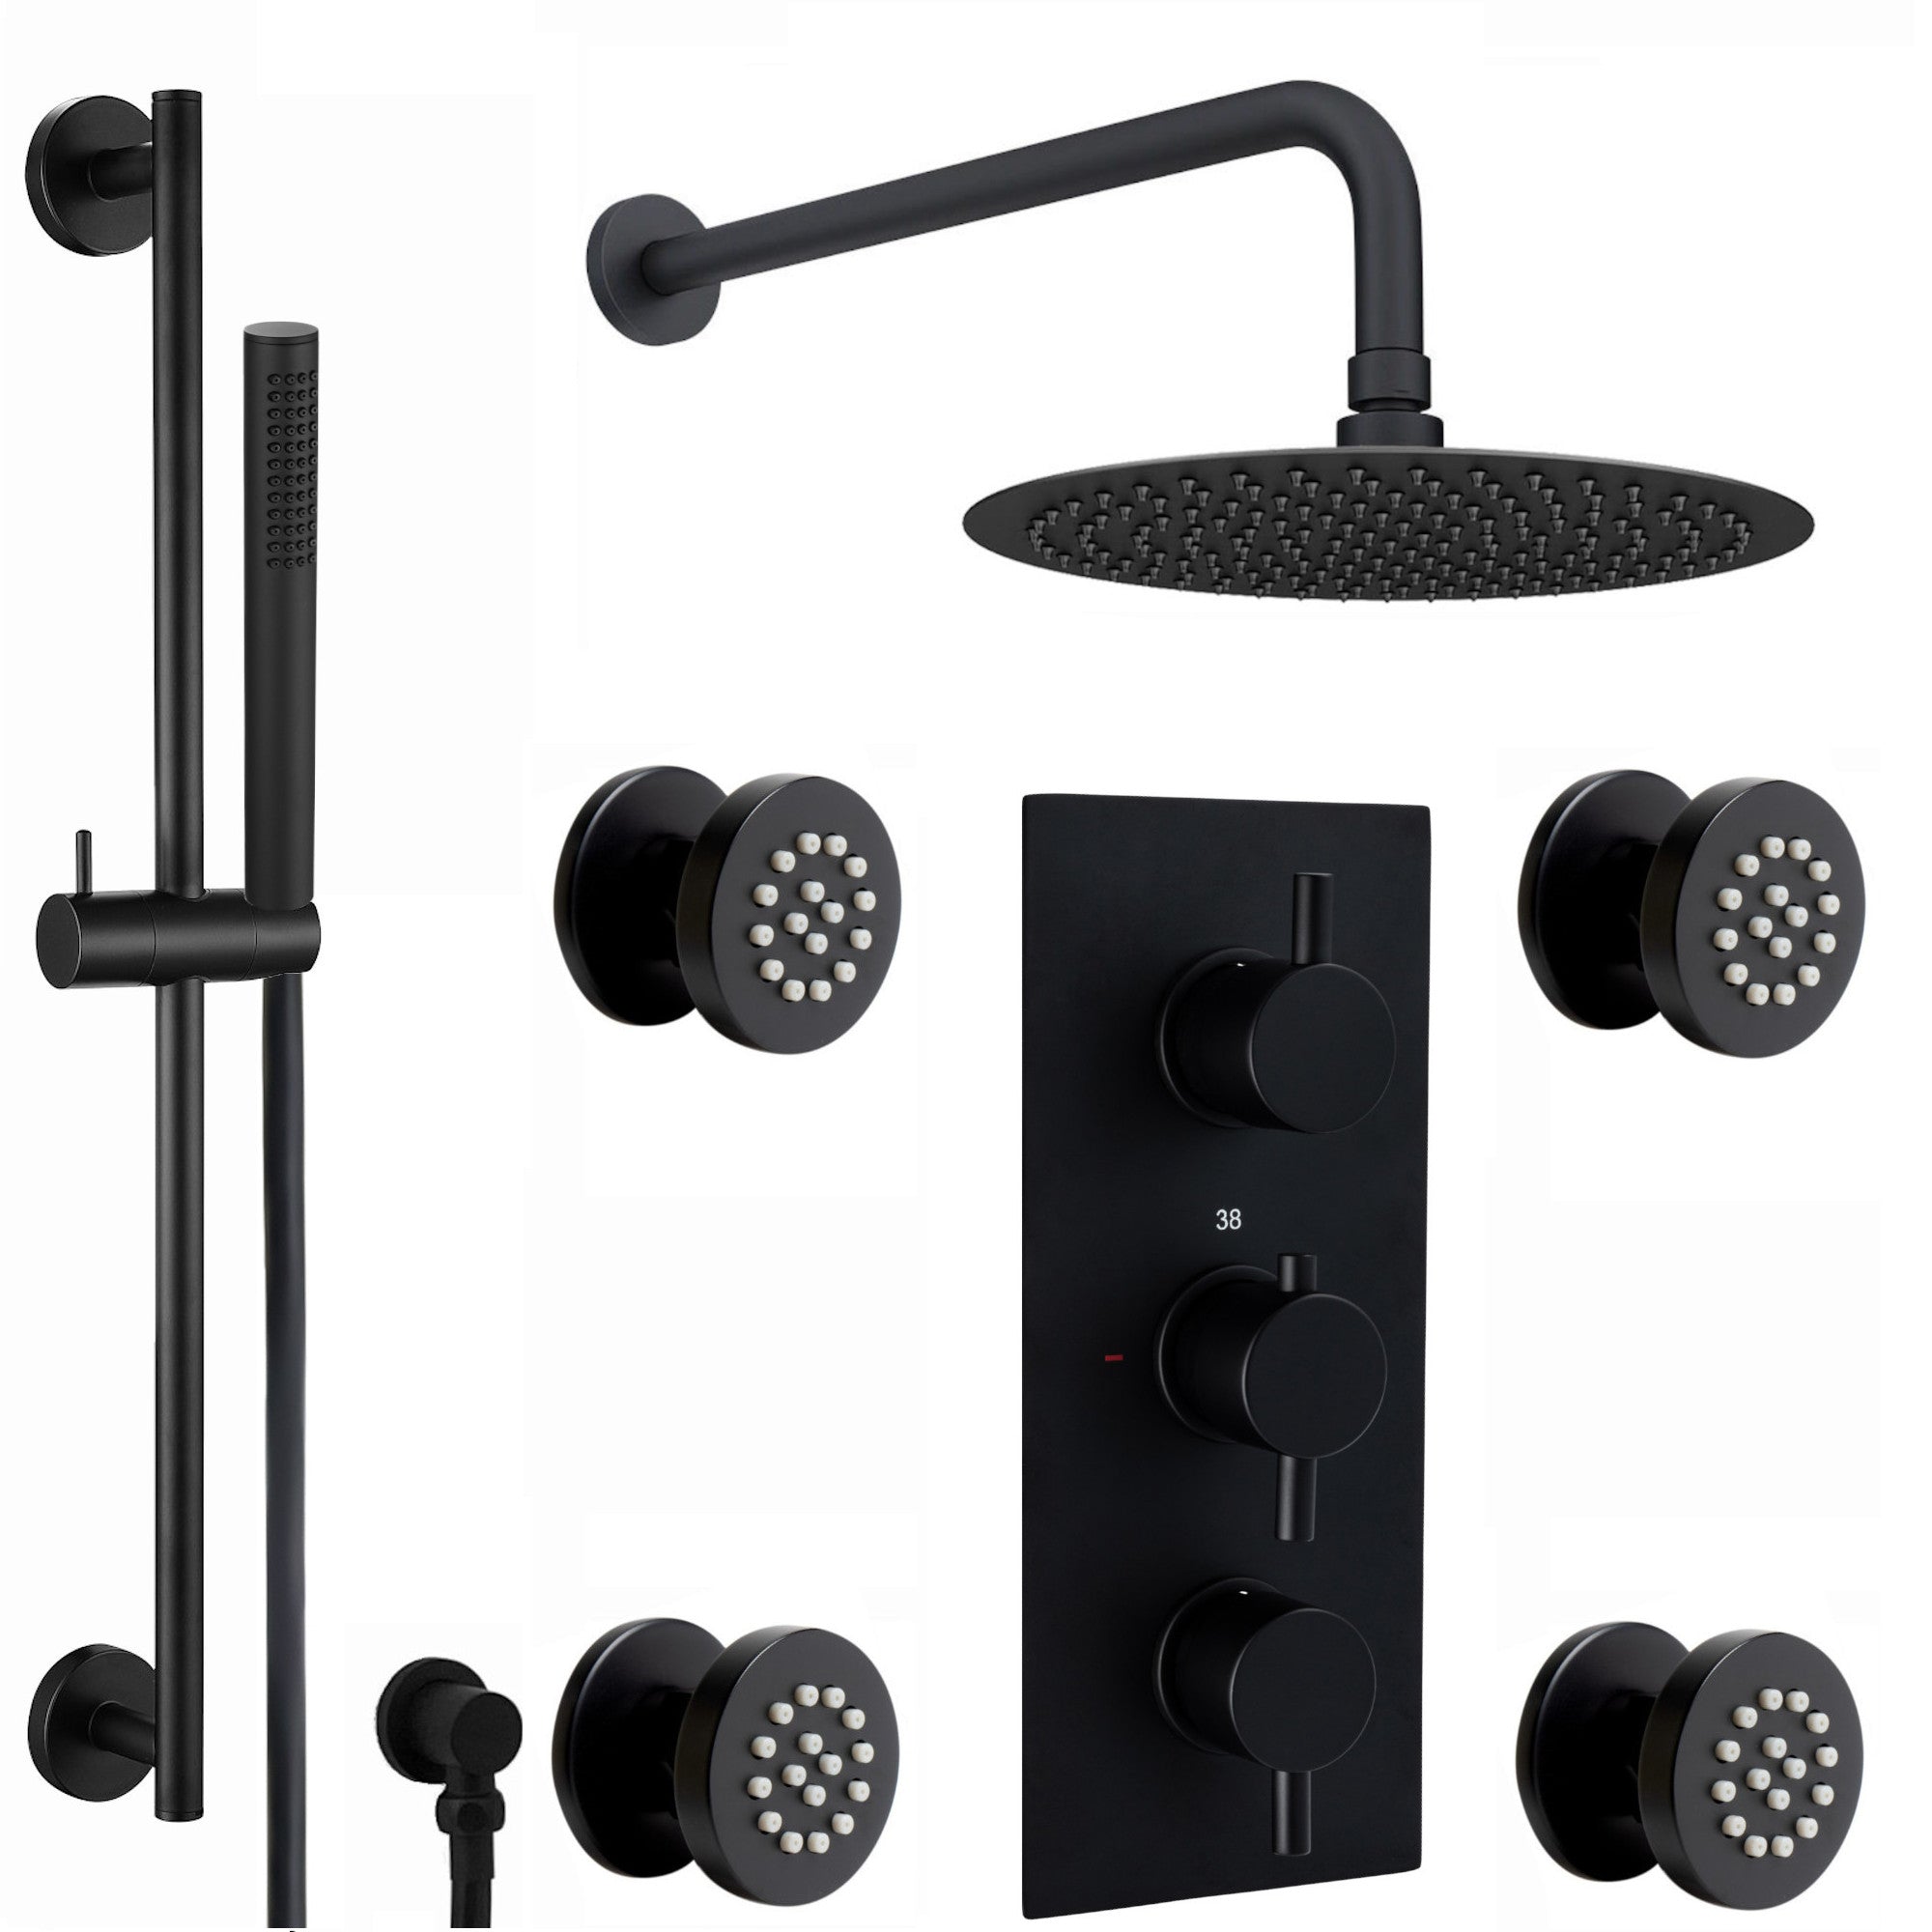 Venice Contemporary Round Concealed Thermostatic Shower Set Incl. Triple Diverter Valve, Wall Fixed 8" Shower Head, Slider Rail Kit, 4 Body Jets - Black (3 Outlet)